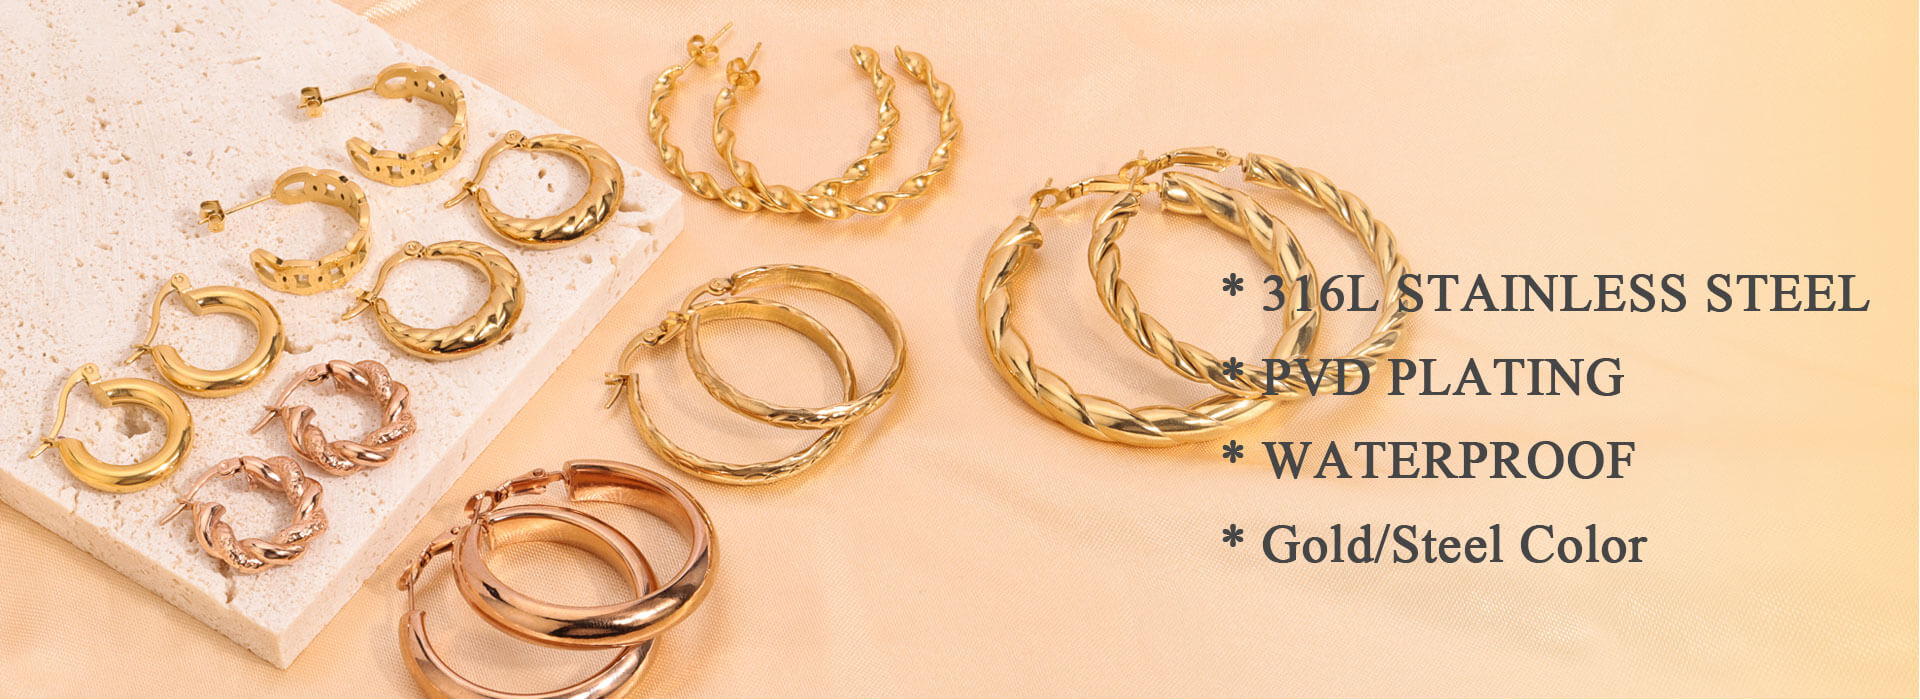 Stainless Steel Jewelry Wholesale, Stainless Steel Jewelry Manufacturers